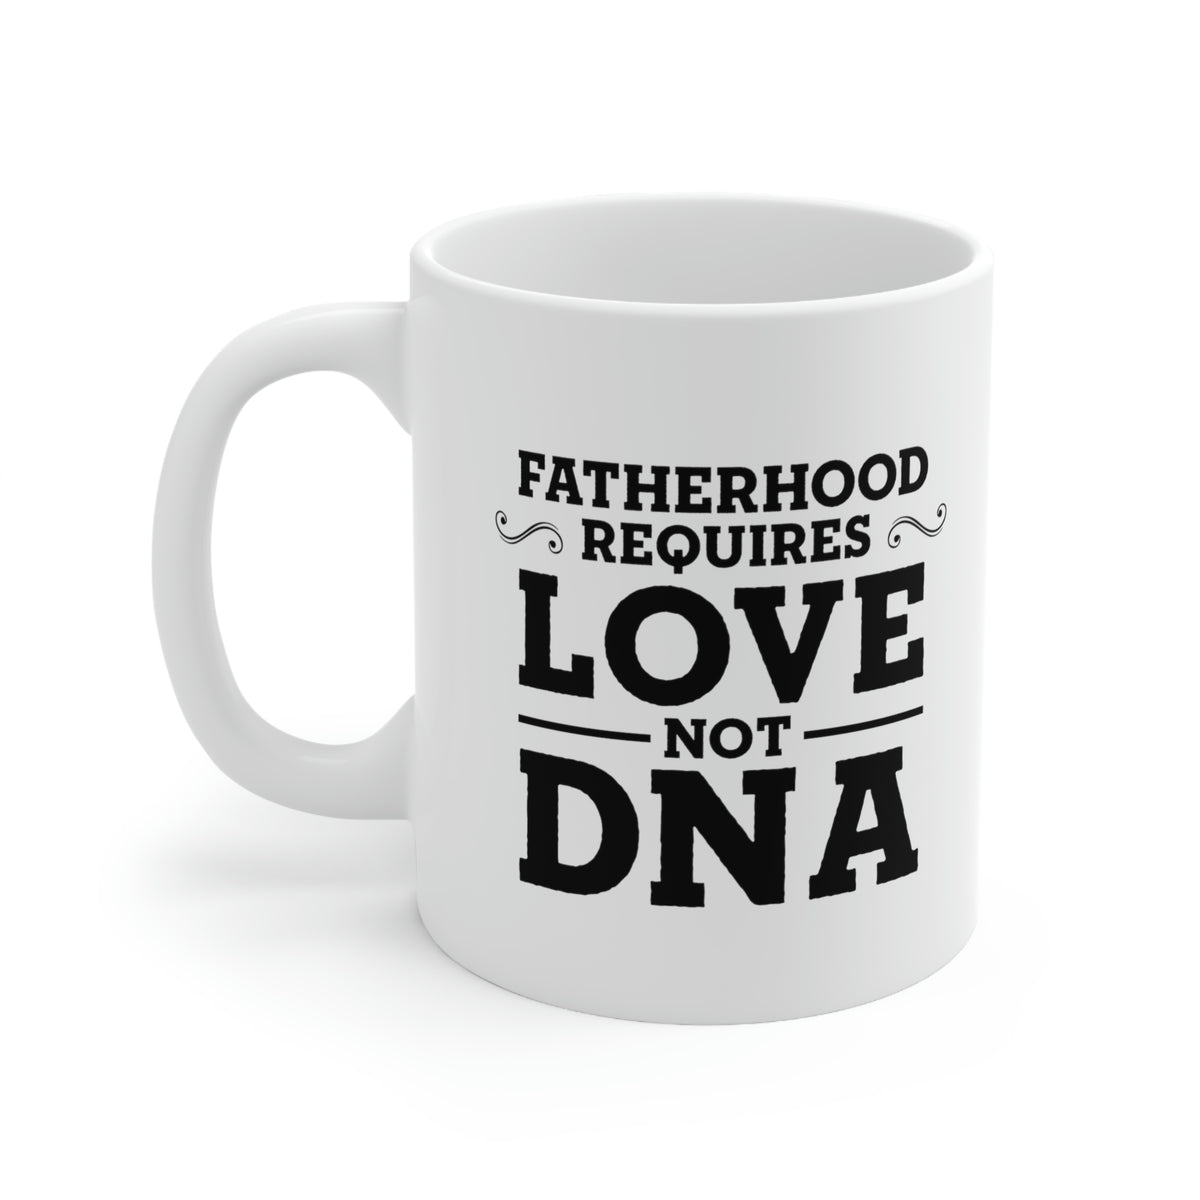 Fatherhood Requires Love, Not DNA - Coffee Mug For Best Father From Daughter